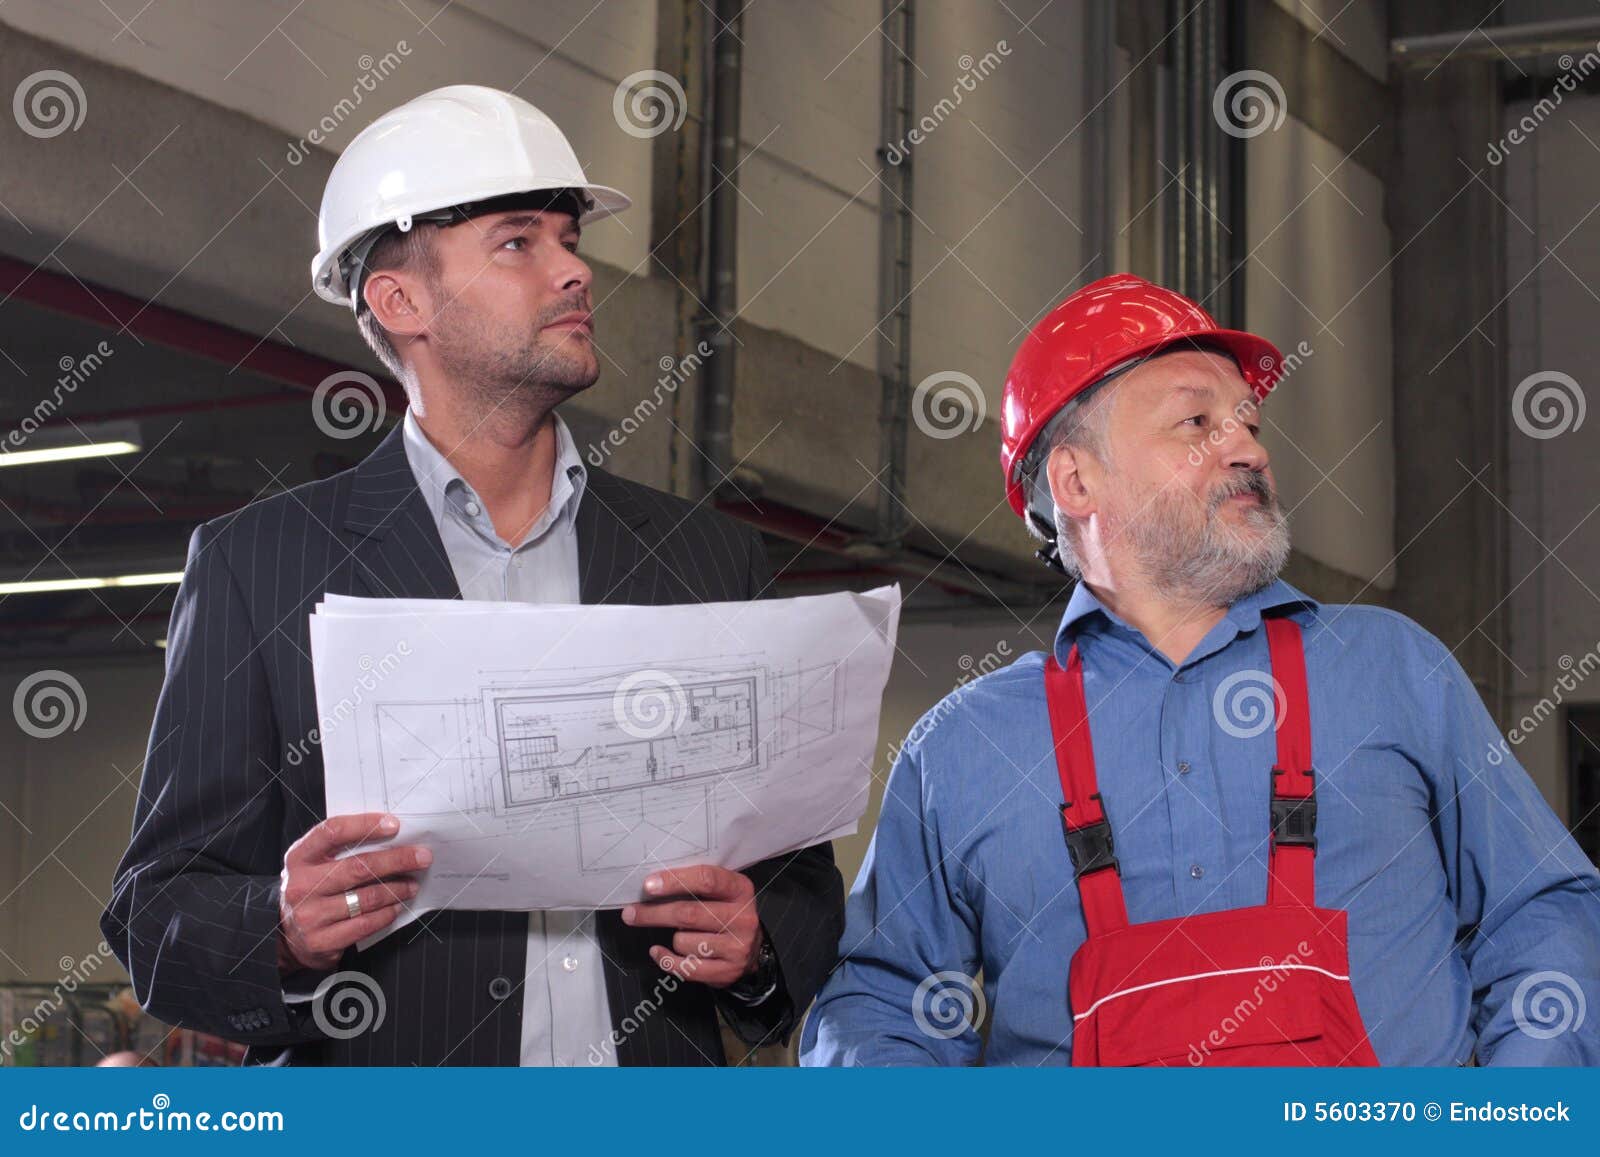 Two professionals with set of blueprints. Businessmen and older worker, wearing hardhats looking at a set of blueprints and discussing a construction project.